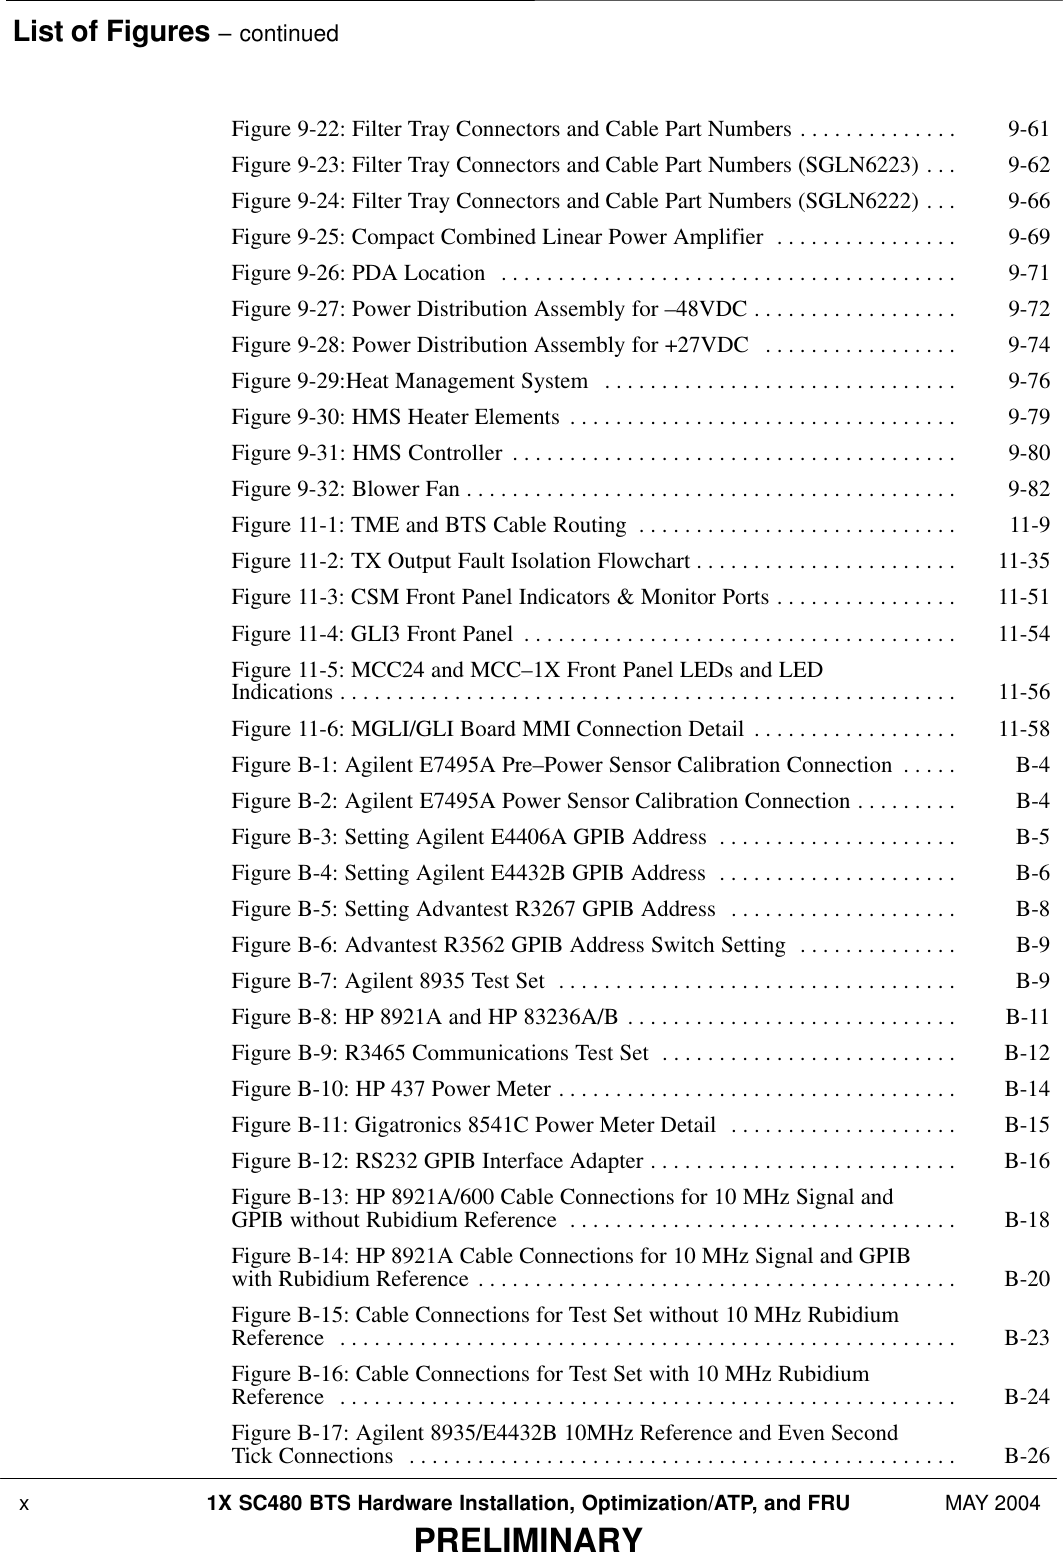 List of Figures – continued x 1X SC480 BTS Hardware Installation, Optimization/ATP, and FRU MAY 2004PRELIMINARYFigure 9-22: Filter Tray Connectors and Cable Part Numbers 9-61 . . . . . . . . . . . . . . Figure 9-23: Filter Tray Connectors and Cable Part Numbers (SGLN6223) 9-62 . . . Figure 9-24: Filter Tray Connectors and Cable Part Numbers (SGLN6222) 9-66 . . . Figure 9-25: Compact Combined Linear Power Amplifier 9-69 . . . . . . . . . . . . . . . . Figure 9-26: PDA Location 9-71 . . . . . . . . . . . . . . . . . . . . . . . . . . . . . . . . . . . . . . . . Figure 9-27: Power Distribution Assembly for –48VDC 9-72 . . . . . . . . . . . . . . . . . . Figure 9-28: Power Distribution Assembly for +27VDC 9-74 . . . . . . . . . . . . . . . . . Figure 9-29:Heat Management System 9-76 . . . . . . . . . . . . . . . . . . . . . . . . . . . . . . . Figure 9-30: HMS Heater Elements 9-79 . . . . . . . . . . . . . . . . . . . . . . . . . . . . . . . . . . Figure 9-31: HMS Controller 9-80 . . . . . . . . . . . . . . . . . . . . . . . . . . . . . . . . . . . . . . . Figure 9-32: Blower Fan 9-82 . . . . . . . . . . . . . . . . . . . . . . . . . . . . . . . . . . . . . . . . . . . Figure 11-1: TME and BTS Cable Routing 11-9 . . . . . . . . . . . . . . . . . . . . . . . . . . . . Figure 11-2: TX Output Fault Isolation Flowchart 11-35 . . . . . . . . . . . . . . . . . . . . . . . Figure 11-3: CSM Front Panel Indicators &amp; Monitor Ports 11-51 . . . . . . . . . . . . . . . . Figure 11-4: GLI3 Front Panel 11-54 . . . . . . . . . . . . . . . . . . . . . . . . . . . . . . . . . . . . . . Figure 11-5: MCC24 and MCC–1X Front Panel LEDs and LED Indications 11-56 . . . . . . . . . . . . . . . . . . . . . . . . . . . . . . . . . . . . . . . . . . . . . . . . . . . . . . Figure 11-6: MGLI/GLI Board MMI Connection Detail 11-58 . . . . . . . . . . . . . . . . . . Figure B-1: Agilent E7495A Pre–Power Sensor Calibration Connection B-4 . . . . . Figure B-2: Agilent E7495A Power Sensor Calibration Connection B-4 . . . . . . . . . Figure B-3: Setting Agilent E4406A GPIB Address B-5 . . . . . . . . . . . . . . . . . . . . . Figure B-4: Setting Agilent E4432B GPIB Address B-6 . . . . . . . . . . . . . . . . . . . . . Figure B-5: Setting Advantest R3267 GPIB Address B-8 . . . . . . . . . . . . . . . . . . . . Figure B-6: Advantest R3562 GPIB Address Switch Setting B-9 . . . . . . . . . . . . . . Figure B-7: Agilent 8935 Test Set B-9 . . . . . . . . . . . . . . . . . . . . . . . . . . . . . . . . . . . Figure B-8: HP 8921A and HP 83236A/B B-11 . . . . . . . . . . . . . . . . . . . . . . . . . . . . . Figure B-9: R3465 Communications Test Set B-12 . . . . . . . . . . . . . . . . . . . . . . . . . . Figure B-10: HP 437 Power Meter B-14 . . . . . . . . . . . . . . . . . . . . . . . . . . . . . . . . . . . Figure B-11: Gigatronics 8541C Power Meter Detail B-15 . . . . . . . . . . . . . . . . . . . . Figure B-12: RS232 GPIB Interface Adapter B-16 . . . . . . . . . . . . . . . . . . . . . . . . . . . Figure B-13: HP 8921A/600 Cable Connections for 10 MHz Signal and GPIB without Rubidium Reference B-18 . . . . . . . . . . . . . . . . . . . . . . . . . . . . . . . . . . Figure B-14: HP 8921A Cable Connections for 10 MHz Signal and GPIB with Rubidium Reference B-20 . . . . . . . . . . . . . . . . . . . . . . . . . . . . . . . . . . . . . . . . . . Figure B-15: Cable Connections for Test Set without 10 MHz Rubidium Reference B-23 . . . . . . . . . . . . . . . . . . . . . . . . . . . . . . . . . . . . . . . . . . . . . . . . . . . . . . Figure B-16: Cable Connections for Test Set with 10 MHz Rubidium Reference B-24 . . . . . . . . . . . . . . . . . . . . . . . . . . . . . . . . . . . . . . . . . . . . . . . . . . . . . . Figure B-17: Agilent 8935/E4432B 10MHz Reference and Even Second Tick Connections B-26 . . . . . . . . . . . . . . . . . . . . . . . . . . . . . . . . . . . . . . . . . . . . . . . . 